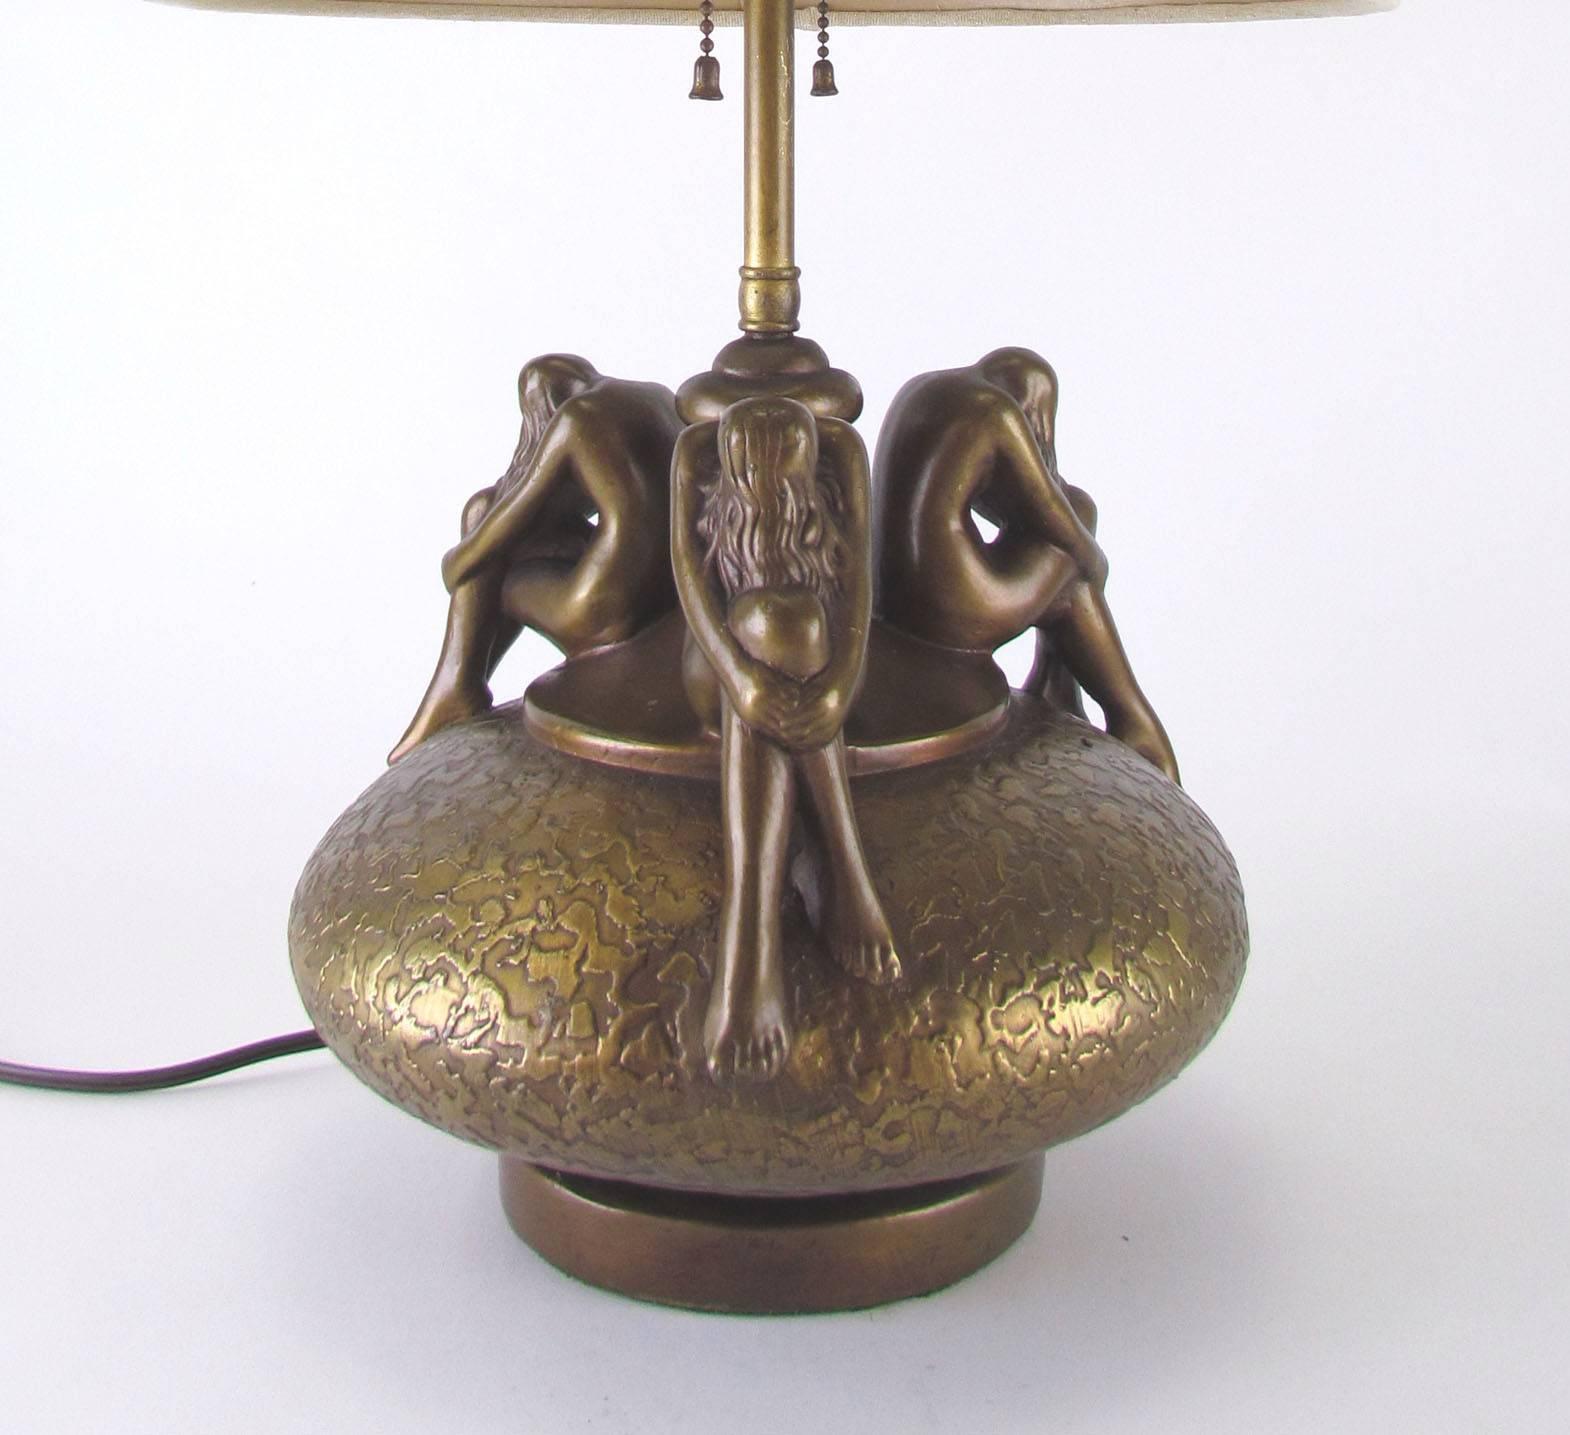 Pair of American art nouveau table lamps in bronze by the Armor Bronze Co., ca. 1920s.  Graceful figures encircle the ovoid base.

21.5